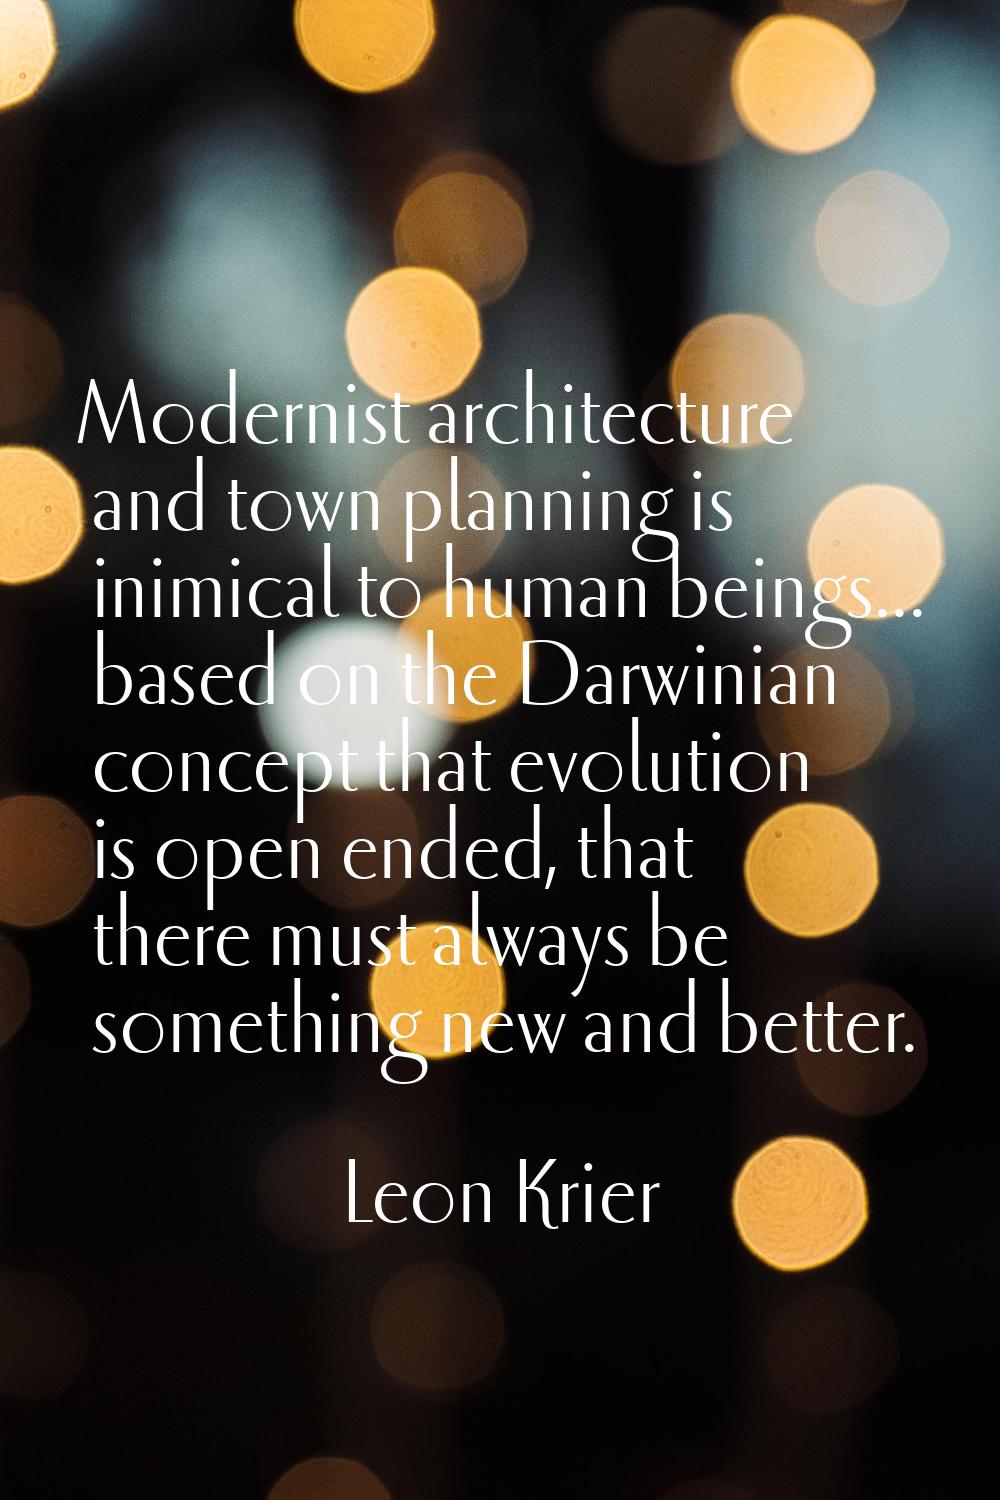 Modernist architecture and town planning is inimical to human beings... based on the Darwinian conc